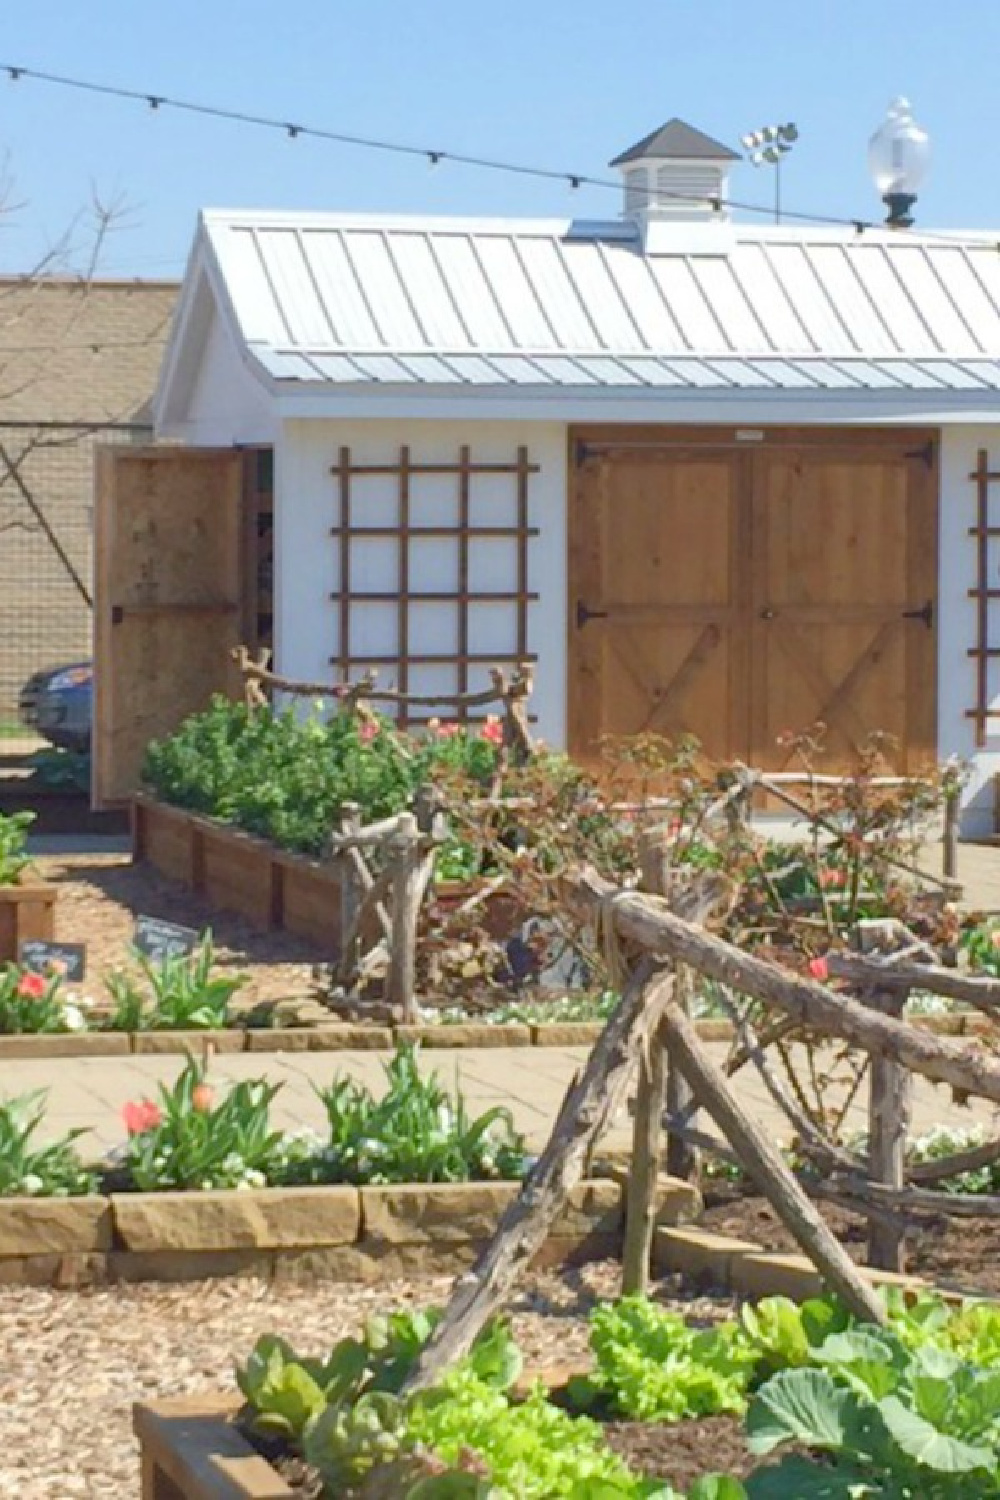 Garden shed and raised beds at Magnolia Silos in Waco - Hello Lovely Studio.